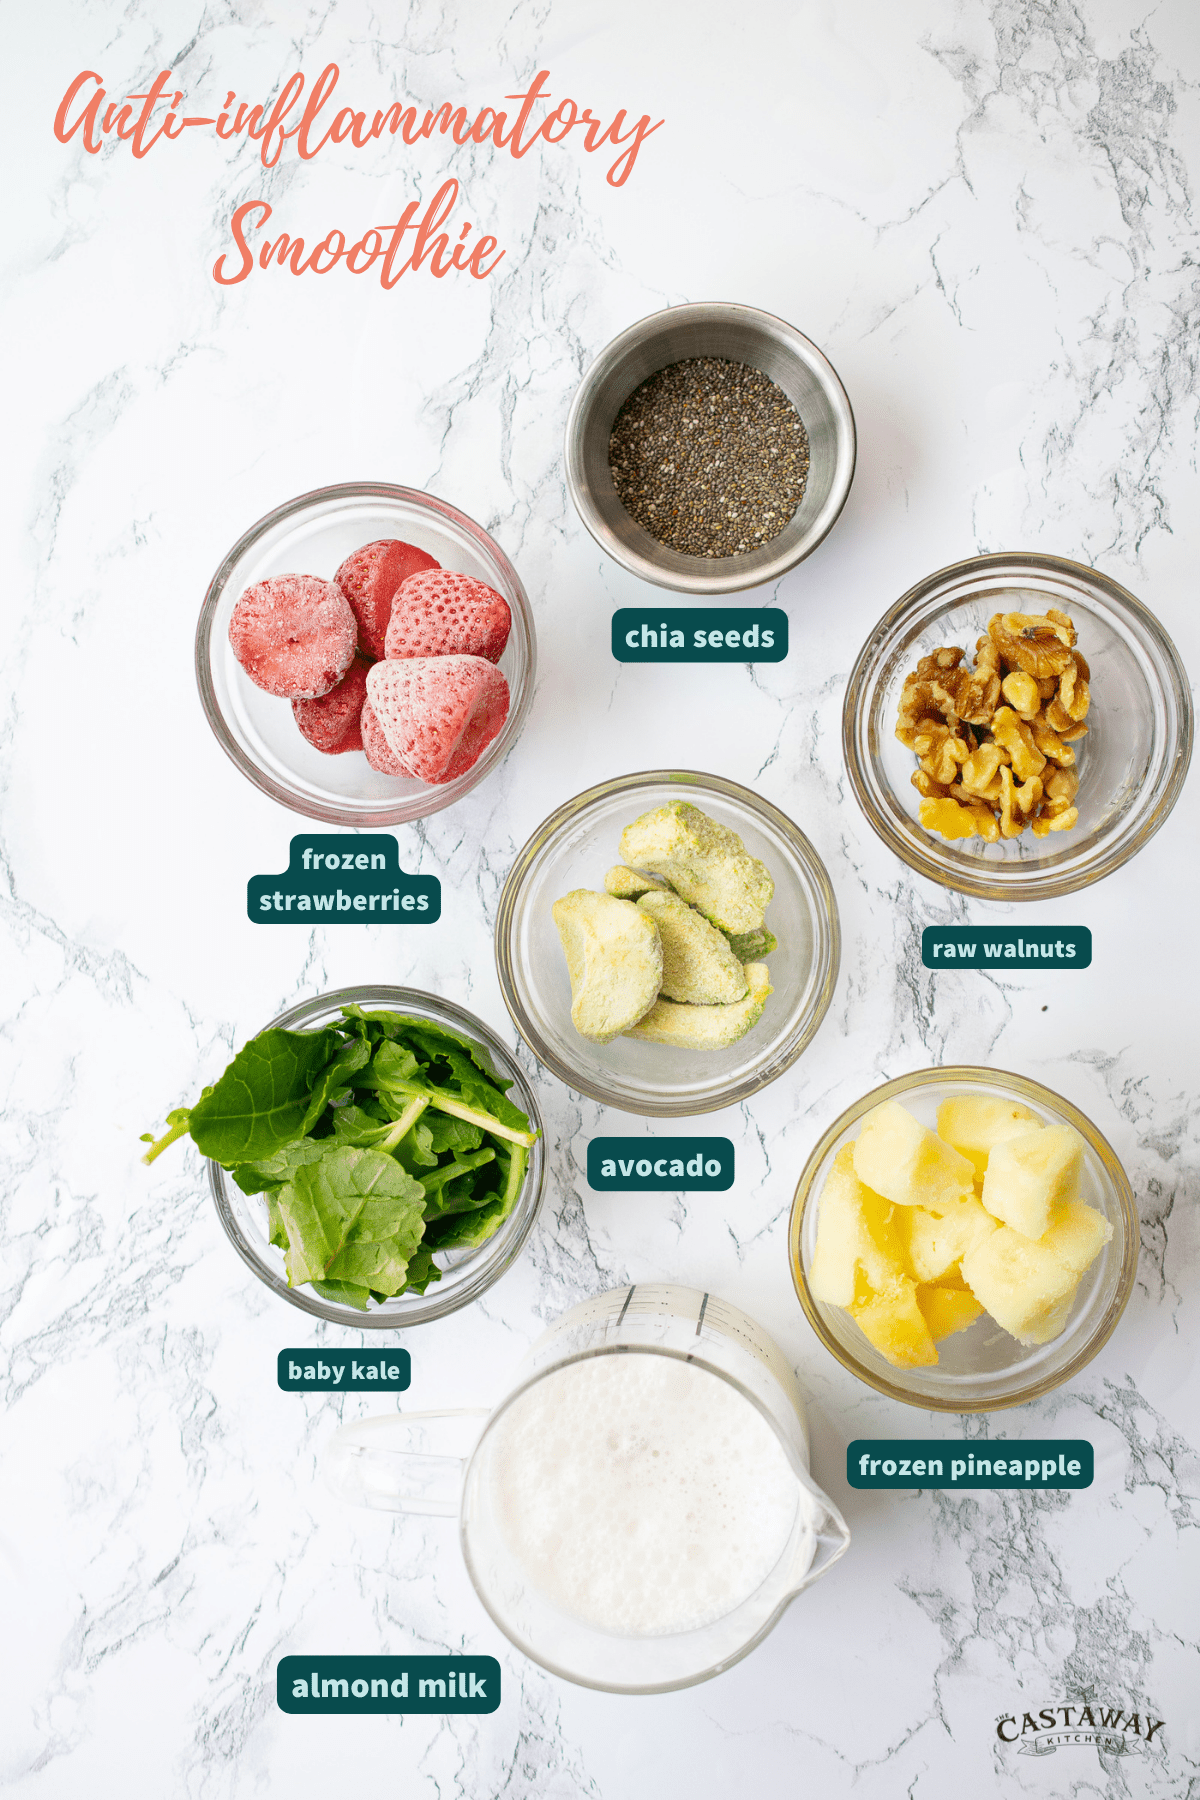 ingredients for anti-inflammatory smoothie in glass bowls on marble counter top; frozen strawberries, raw walnuts, avocado, baby kale, frozen pineapple, almond milk